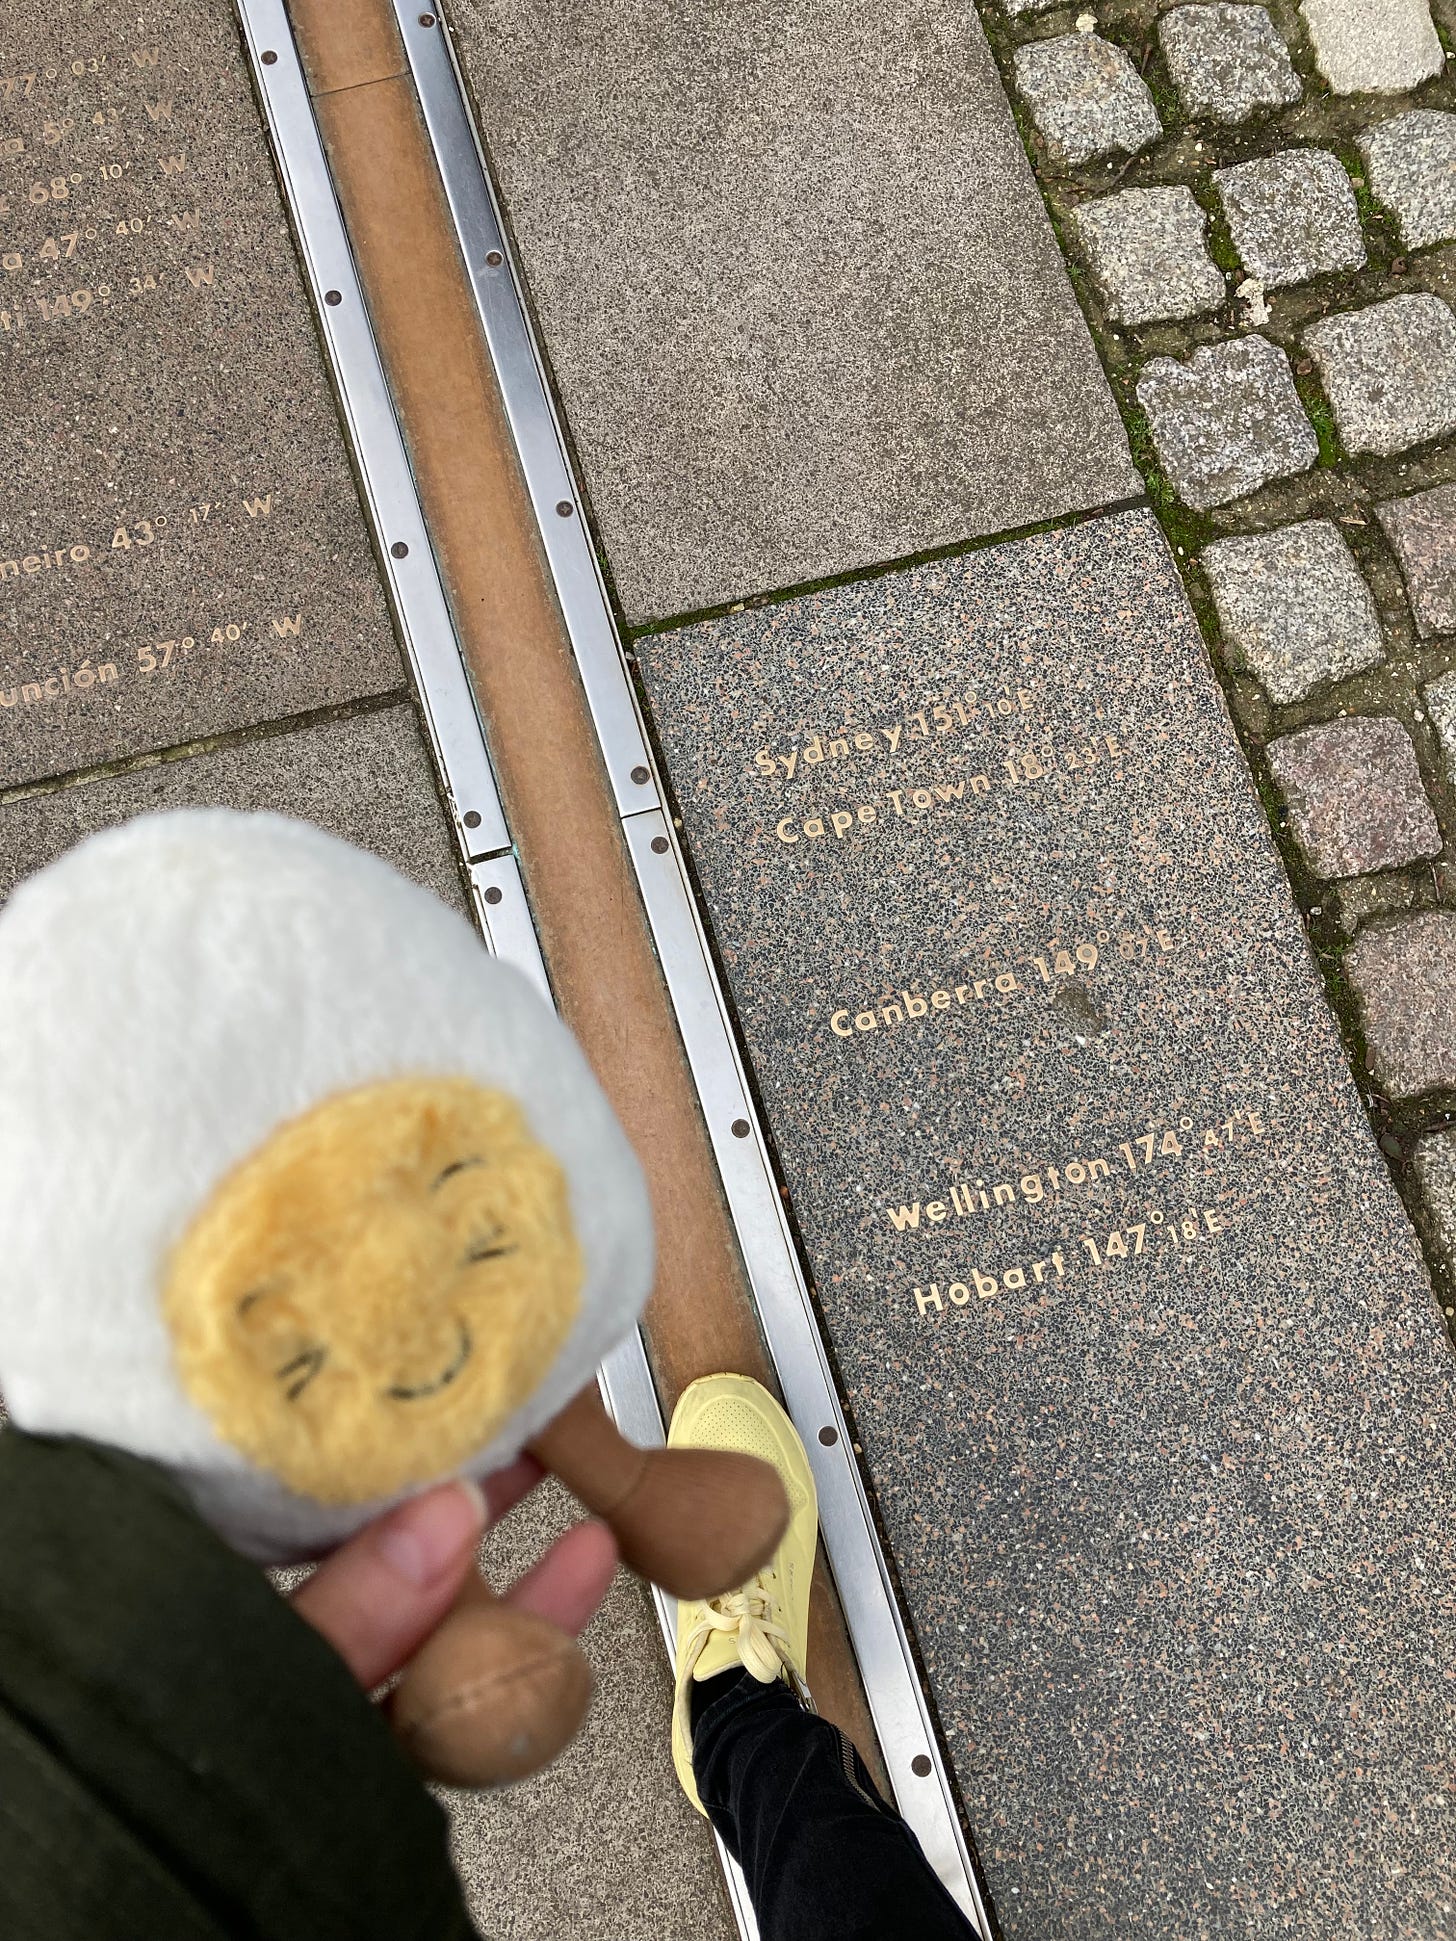 Dippy on the prime meridian line, which is marked in a bronze metal running through paving stones. We are standing next to Sidney, Cape Town, Canberra, Wellington and Hobart markers